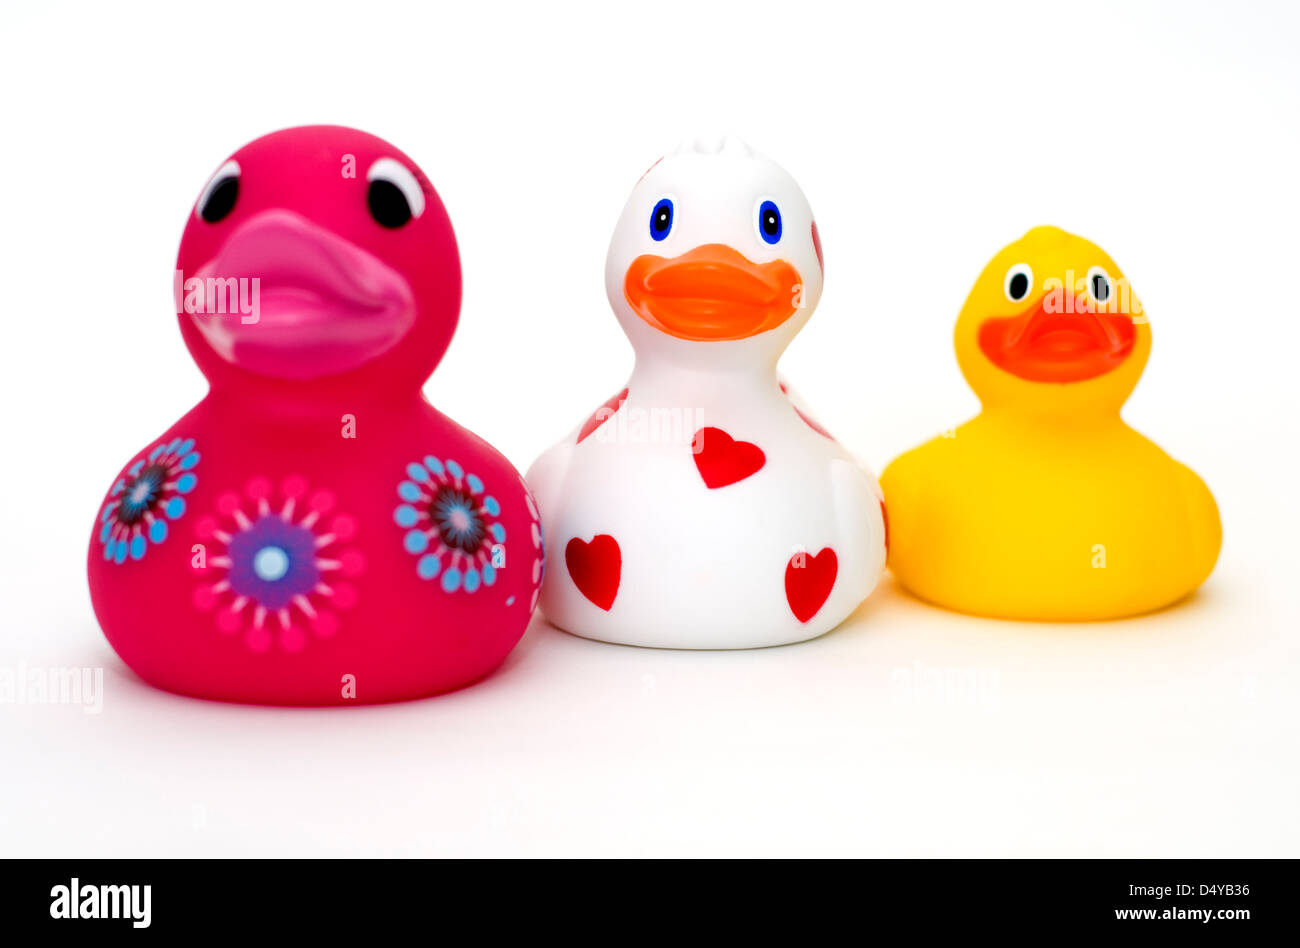 Three colourful rubber ducks on a white background Stock Photo